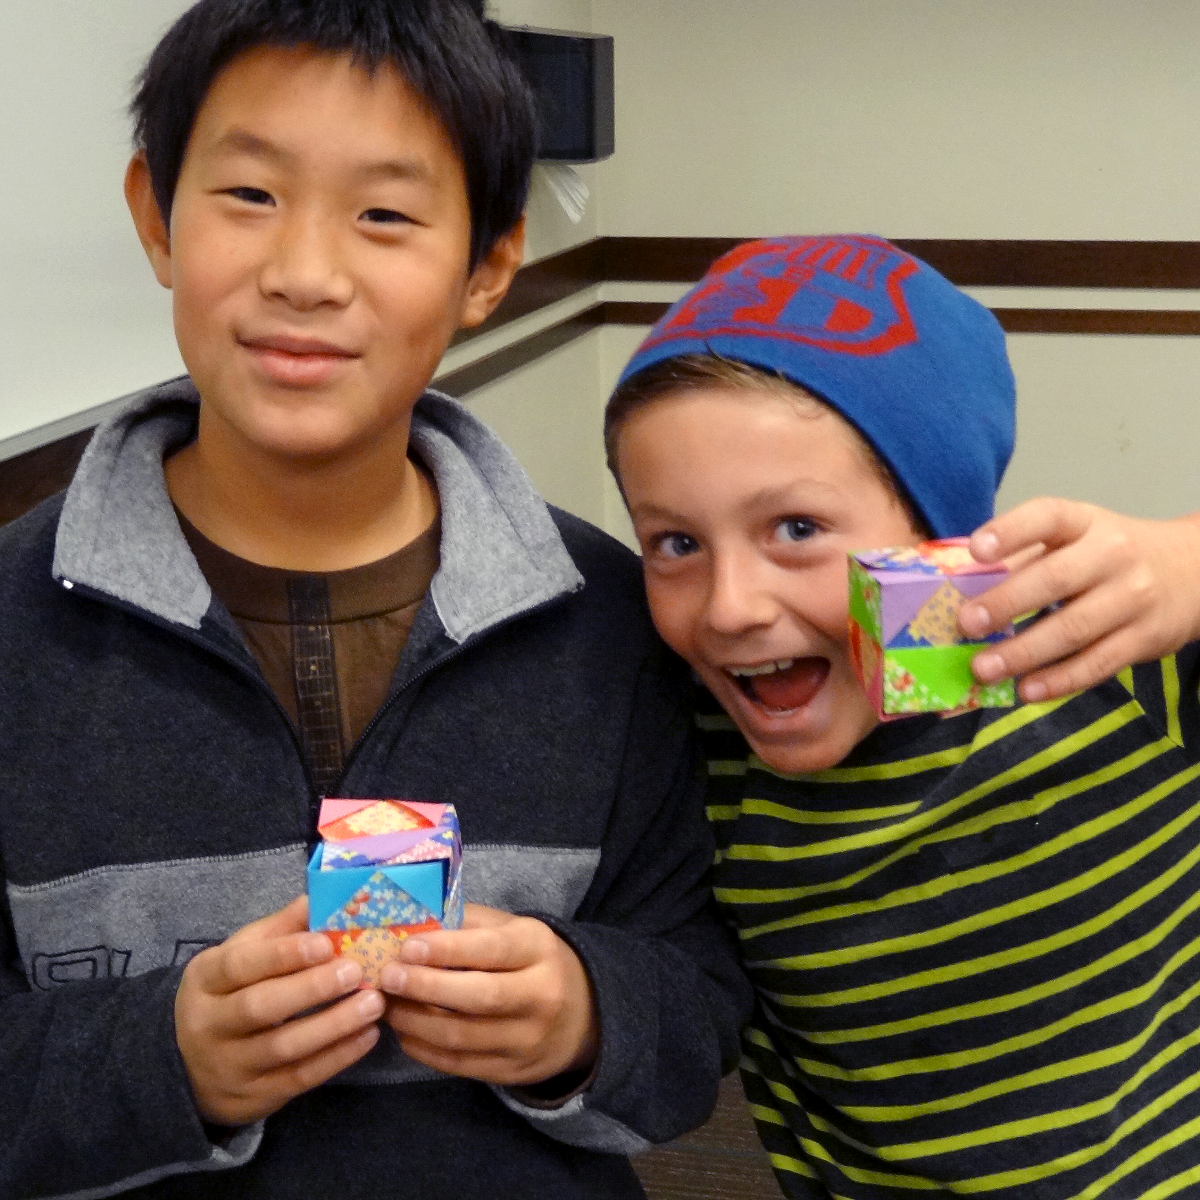 Two young students excitedly hold up orgami cubes